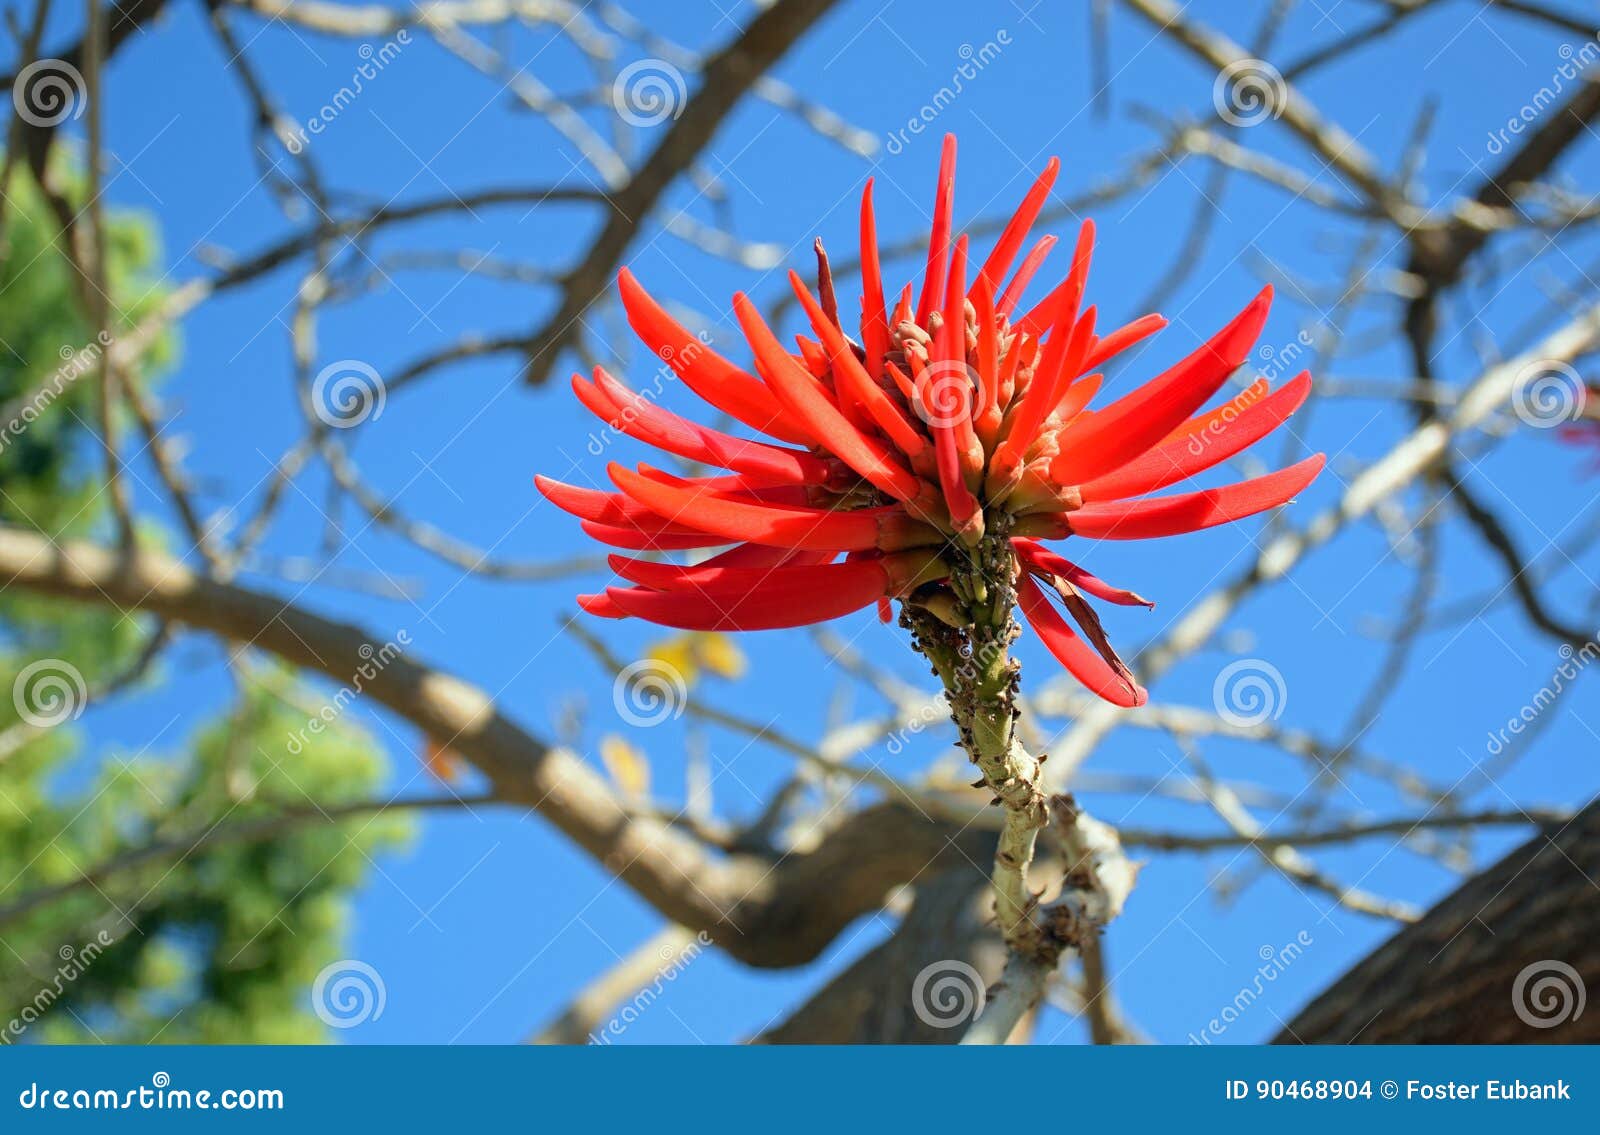 flower of the flame coral tree in laguna woods, califonia.